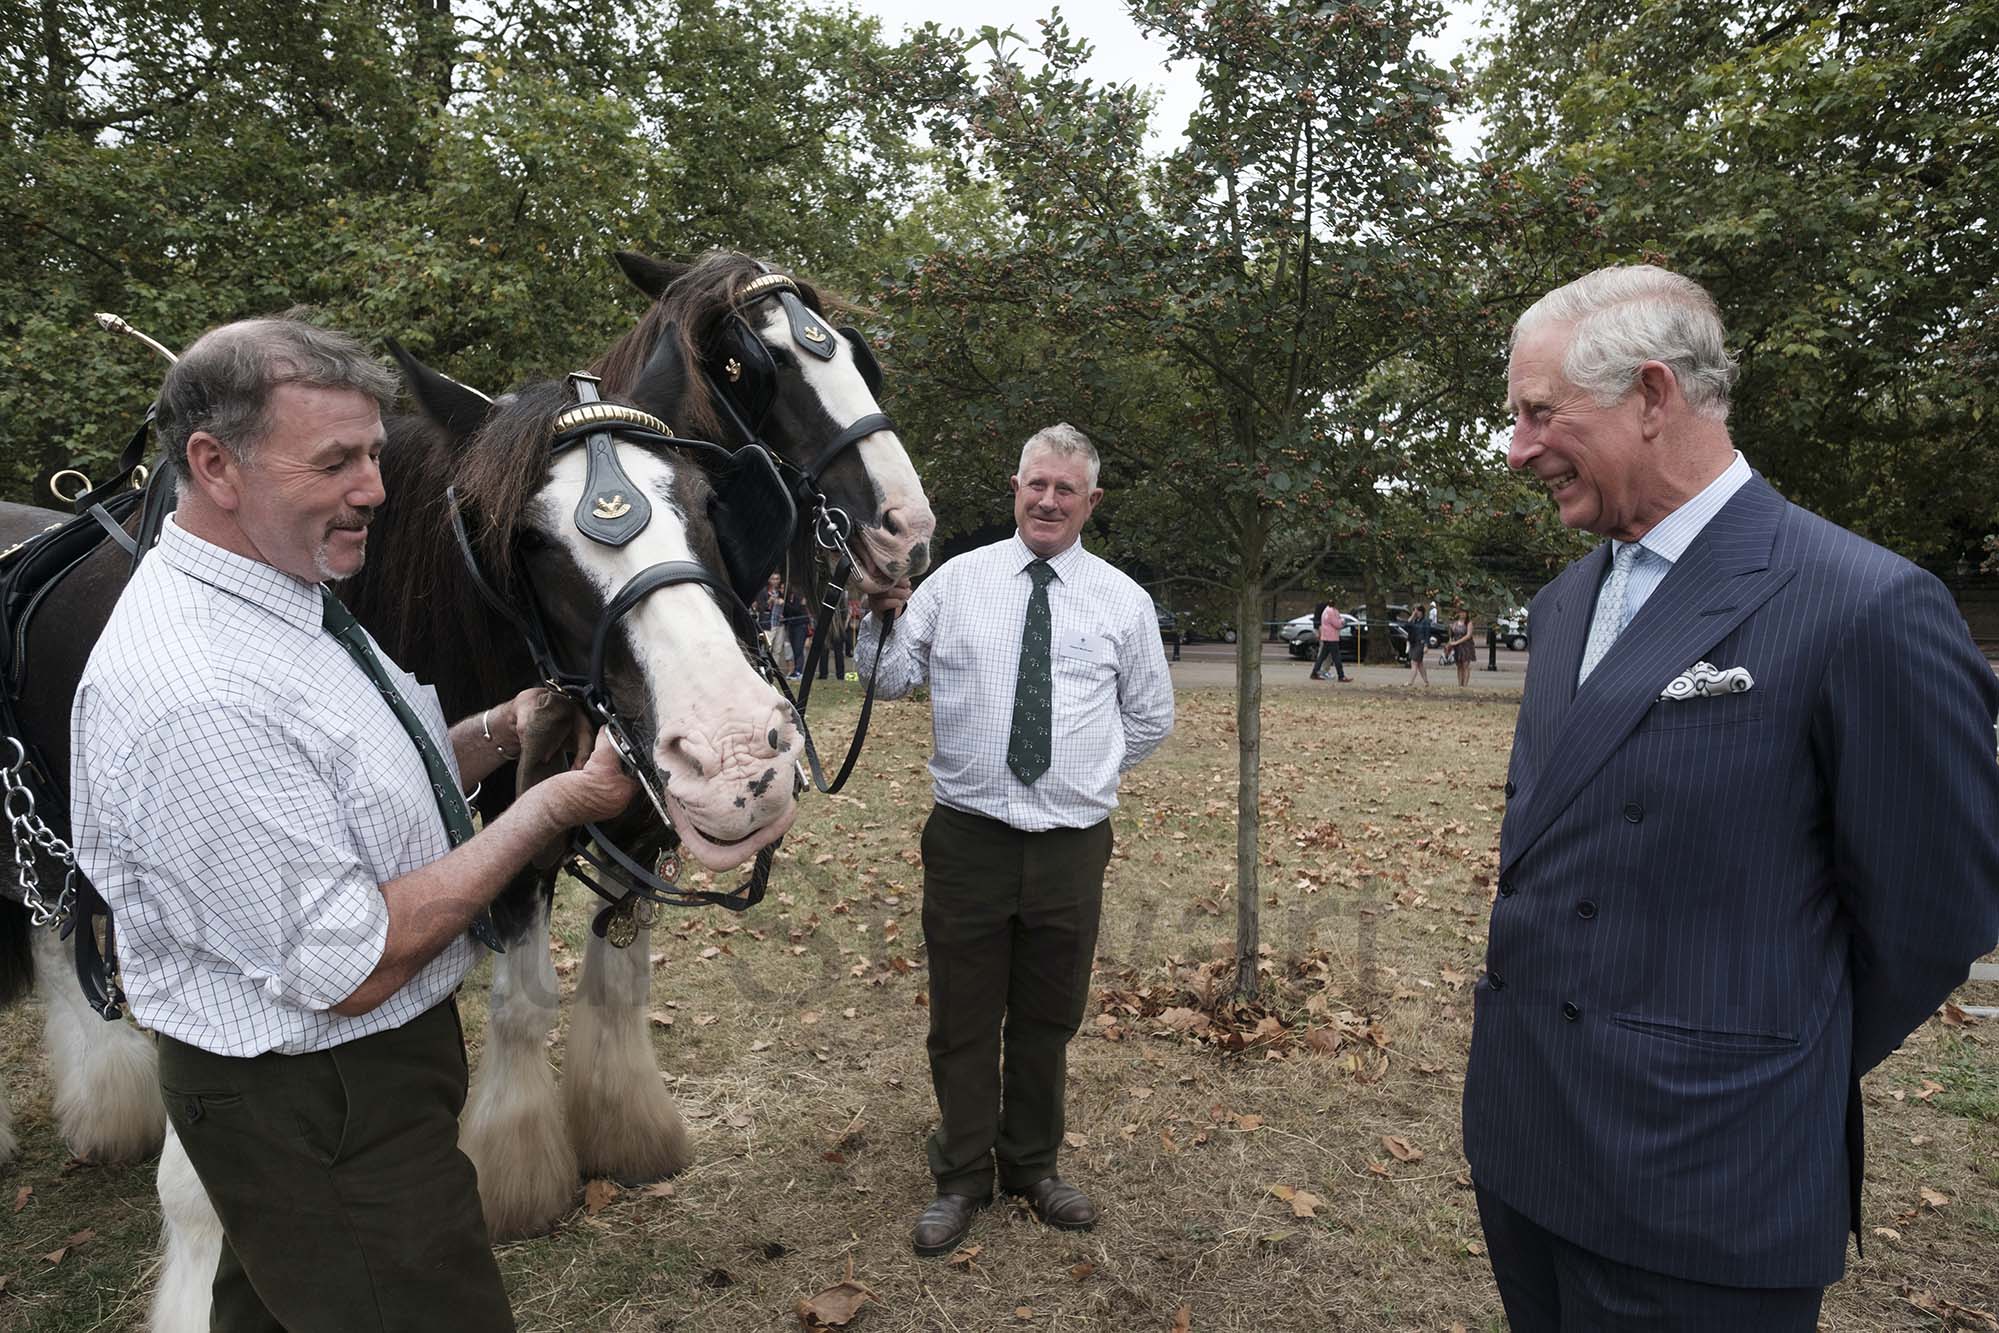 BRITAIN London 06/09/2016 Prince Charles inaugurates the 90th birthday Coronation Meadow to mark the Queen's 90th year by scattering wild seed with some school children. Pictured here His Royal Highness meets (l-R) Tom Nixon and Ed McDowell of Operation Centaur who work with The Royal Parks Shire Horses, The Horsea are L-R Roy, Short for Royal and Aragon, who had harrowed and area of the meadow ready for  sowing ©©©©{copyright}